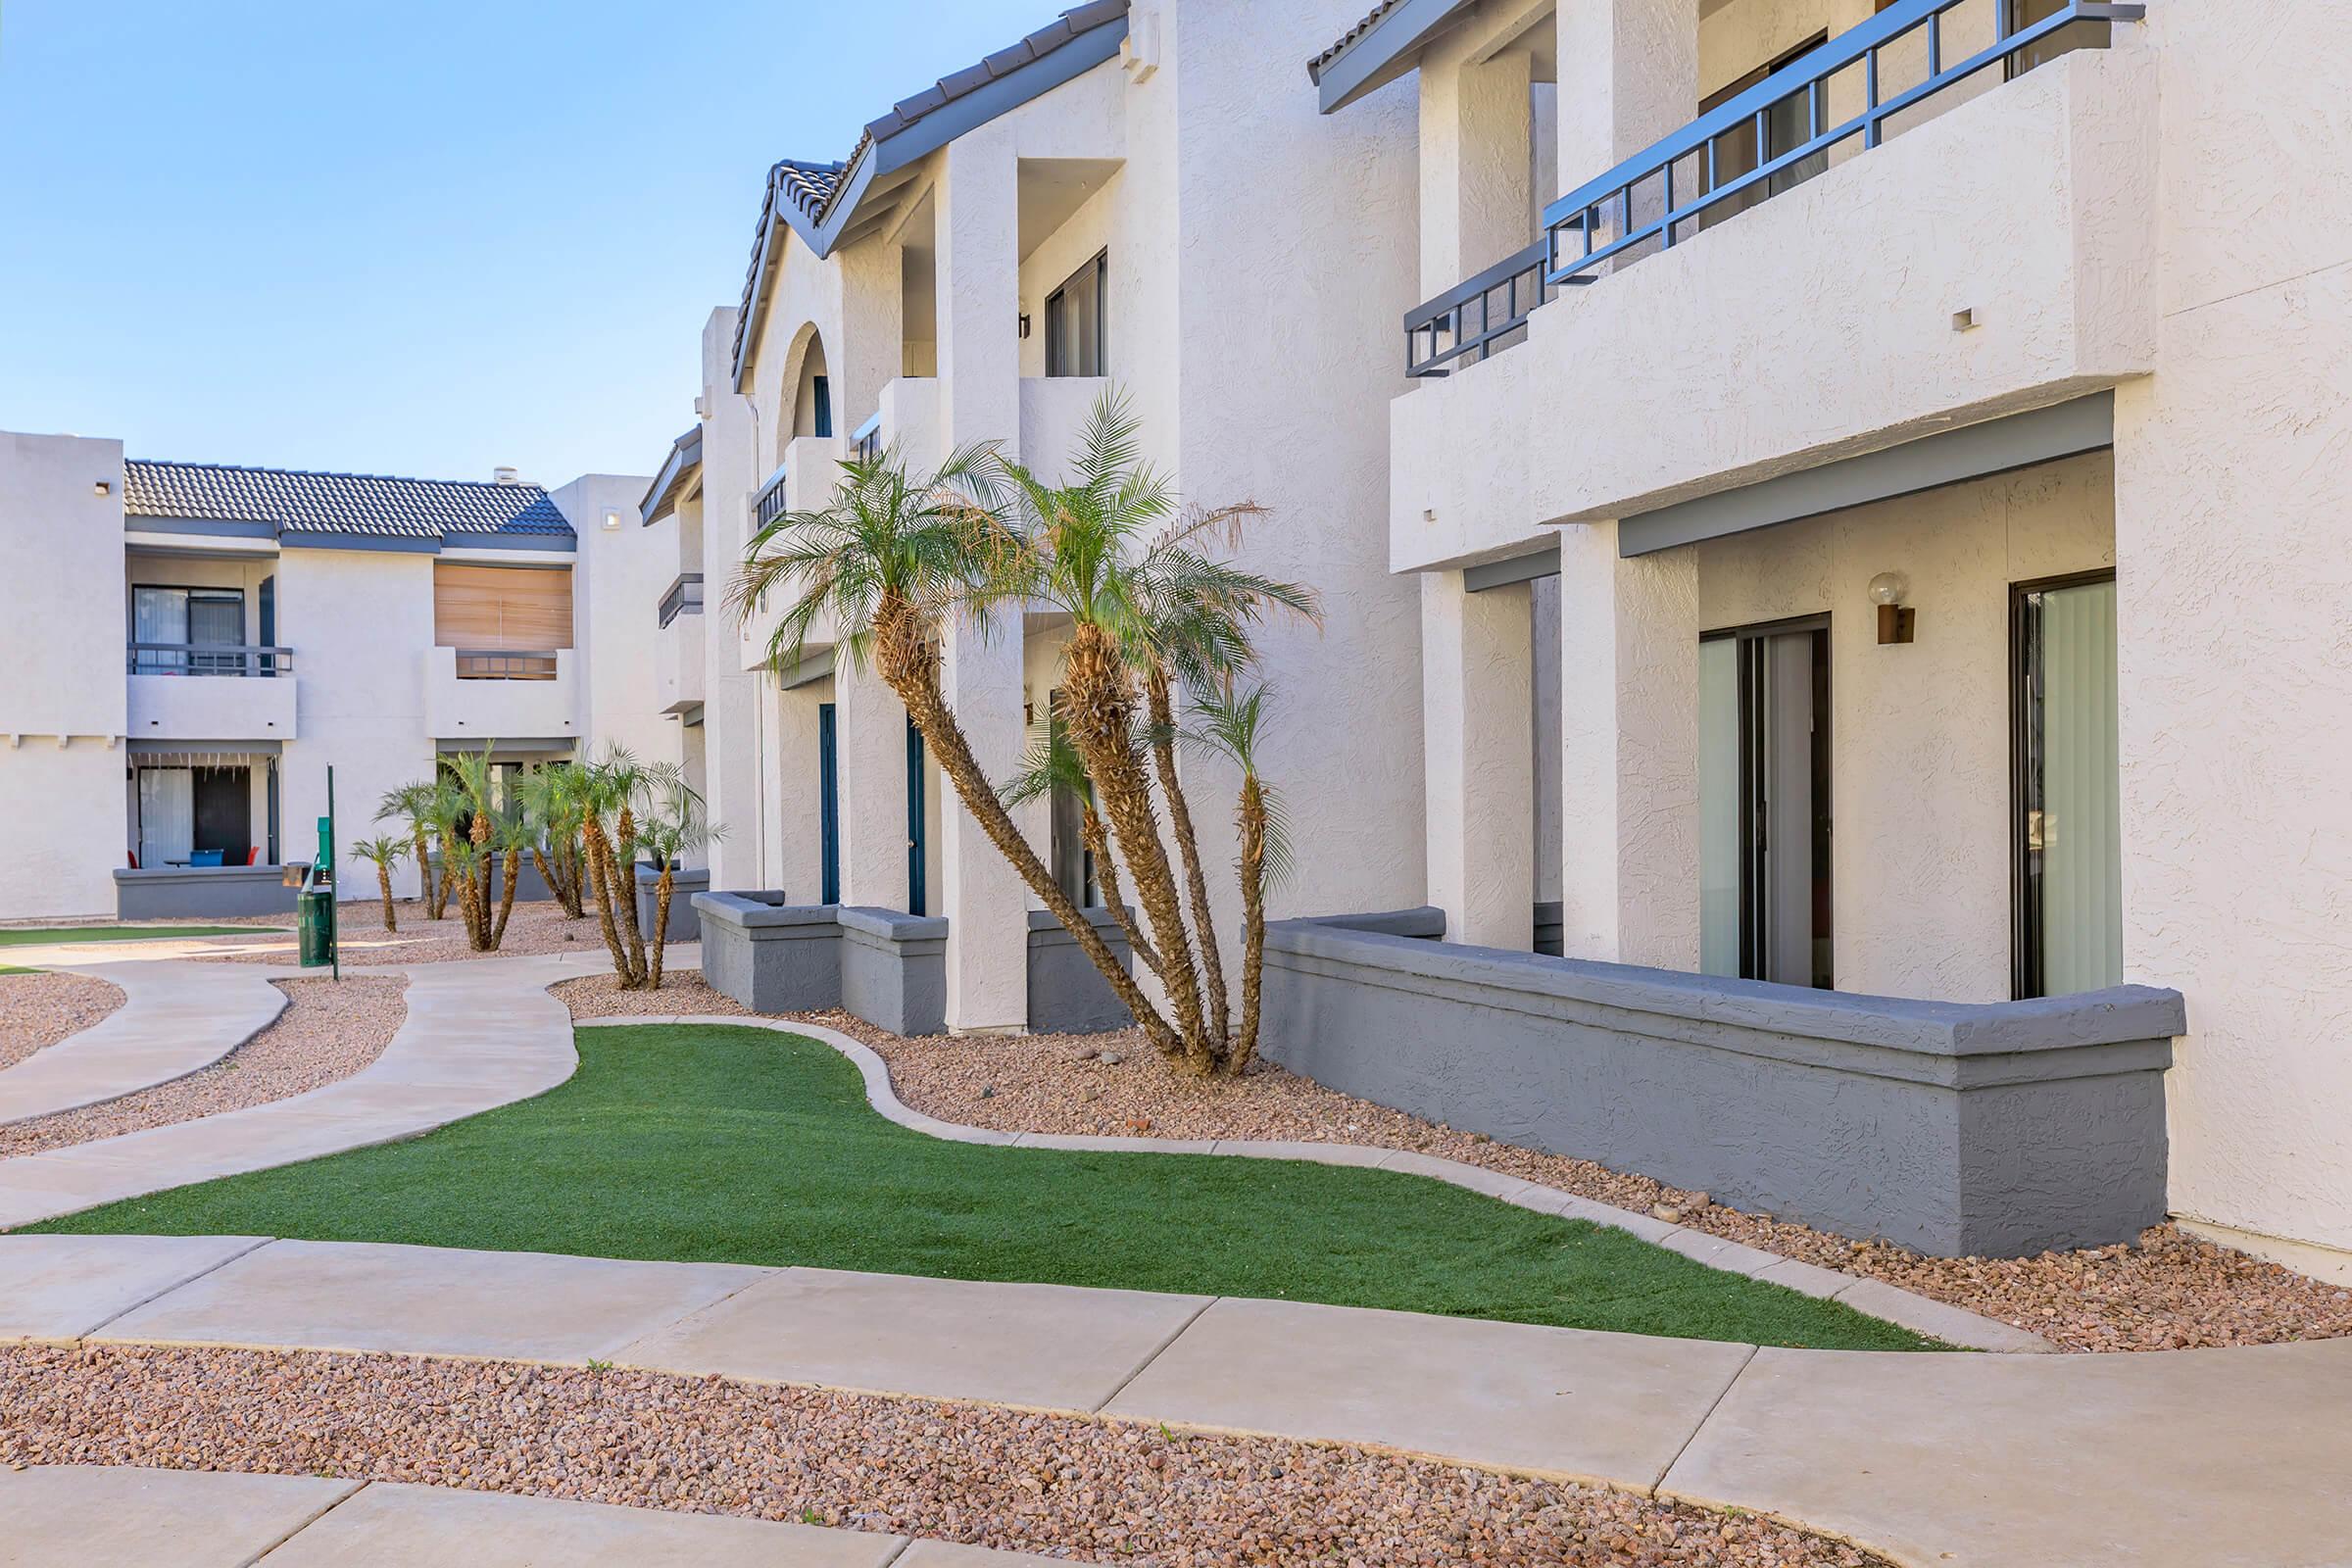 Outside view of the Rise on Cactus apartments with walkways, gravel and grass in front of them